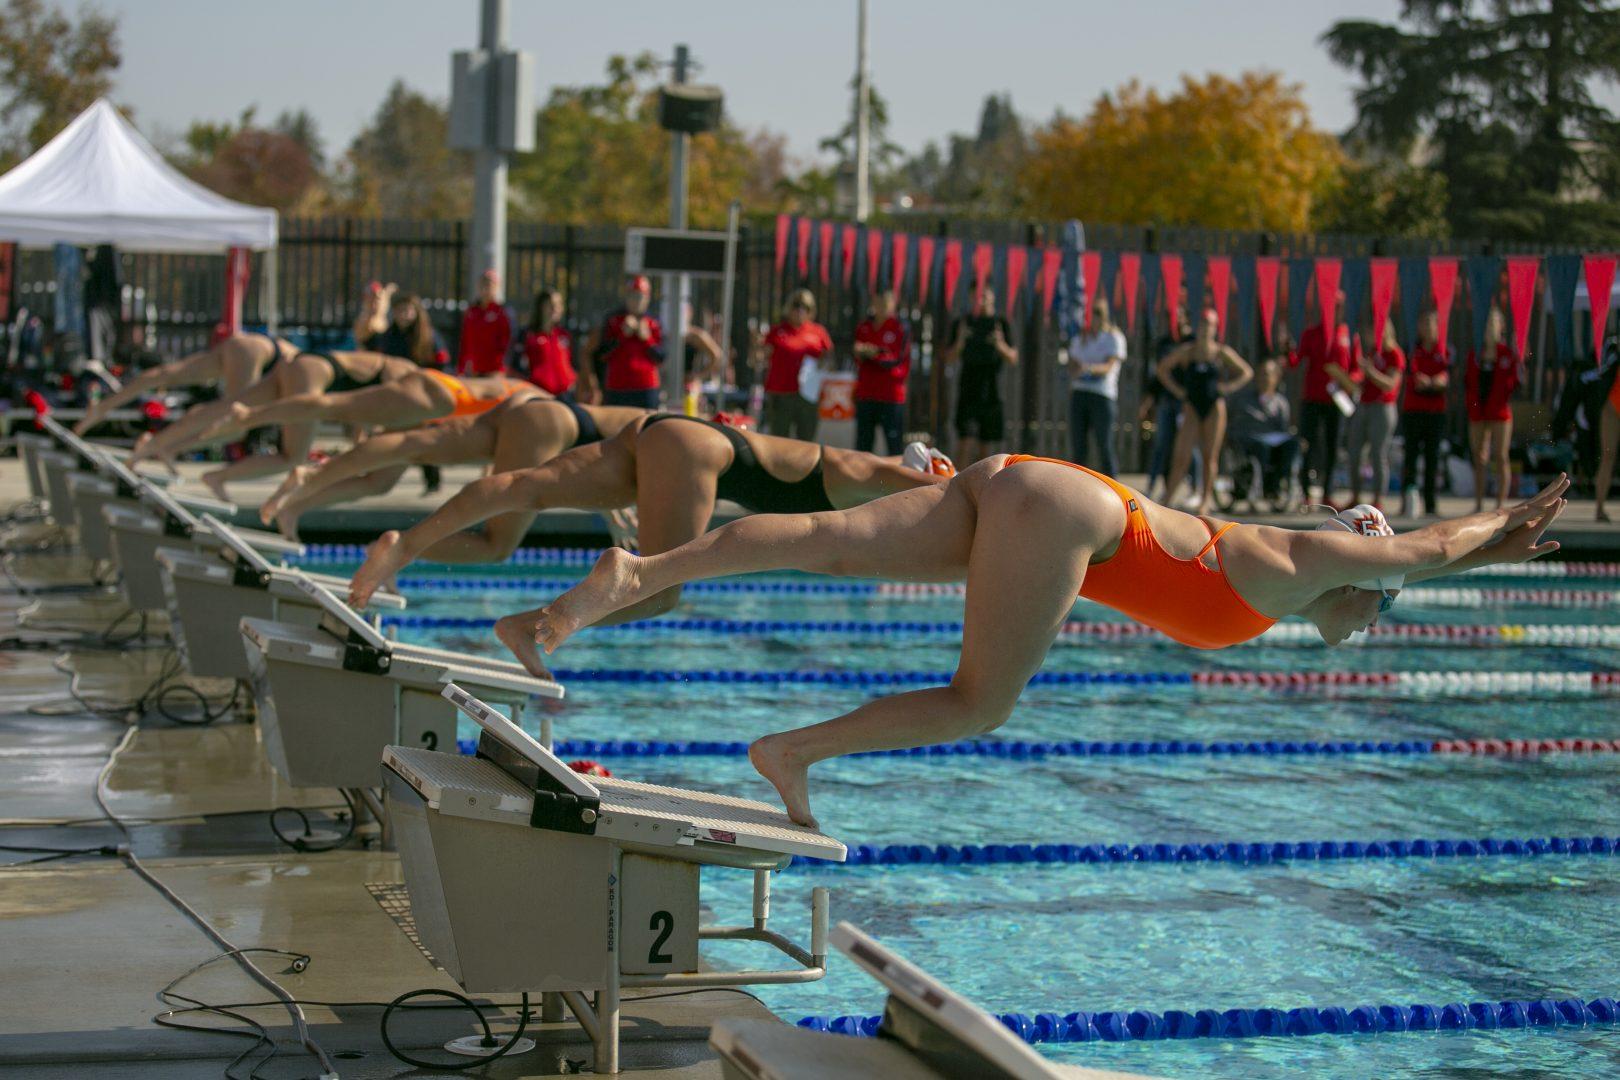 Swimmers+dive+into+the+pool+during+a+competition+at+the+Fresno+State+Aquatic+Center+on+Saturday%2C+Nov.+16+2019.